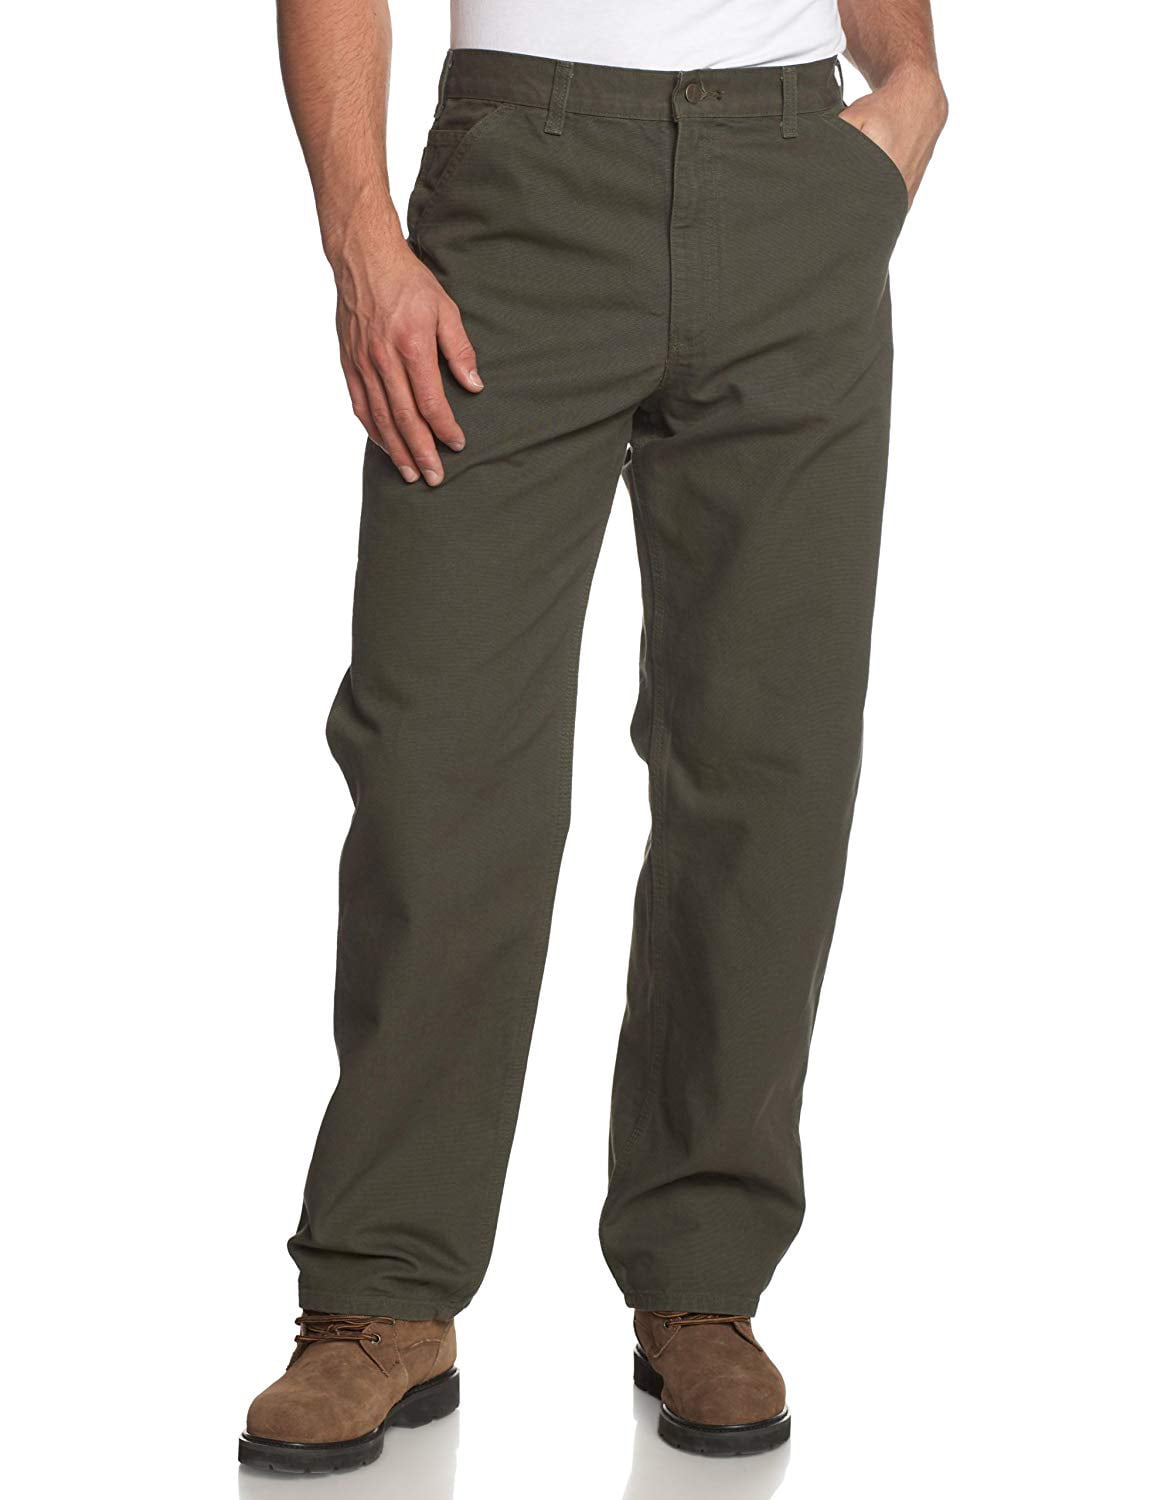 Carhartt Men's Washed Duck Work Dungaree Utility Pant B11,Moss,34 x 36 ...